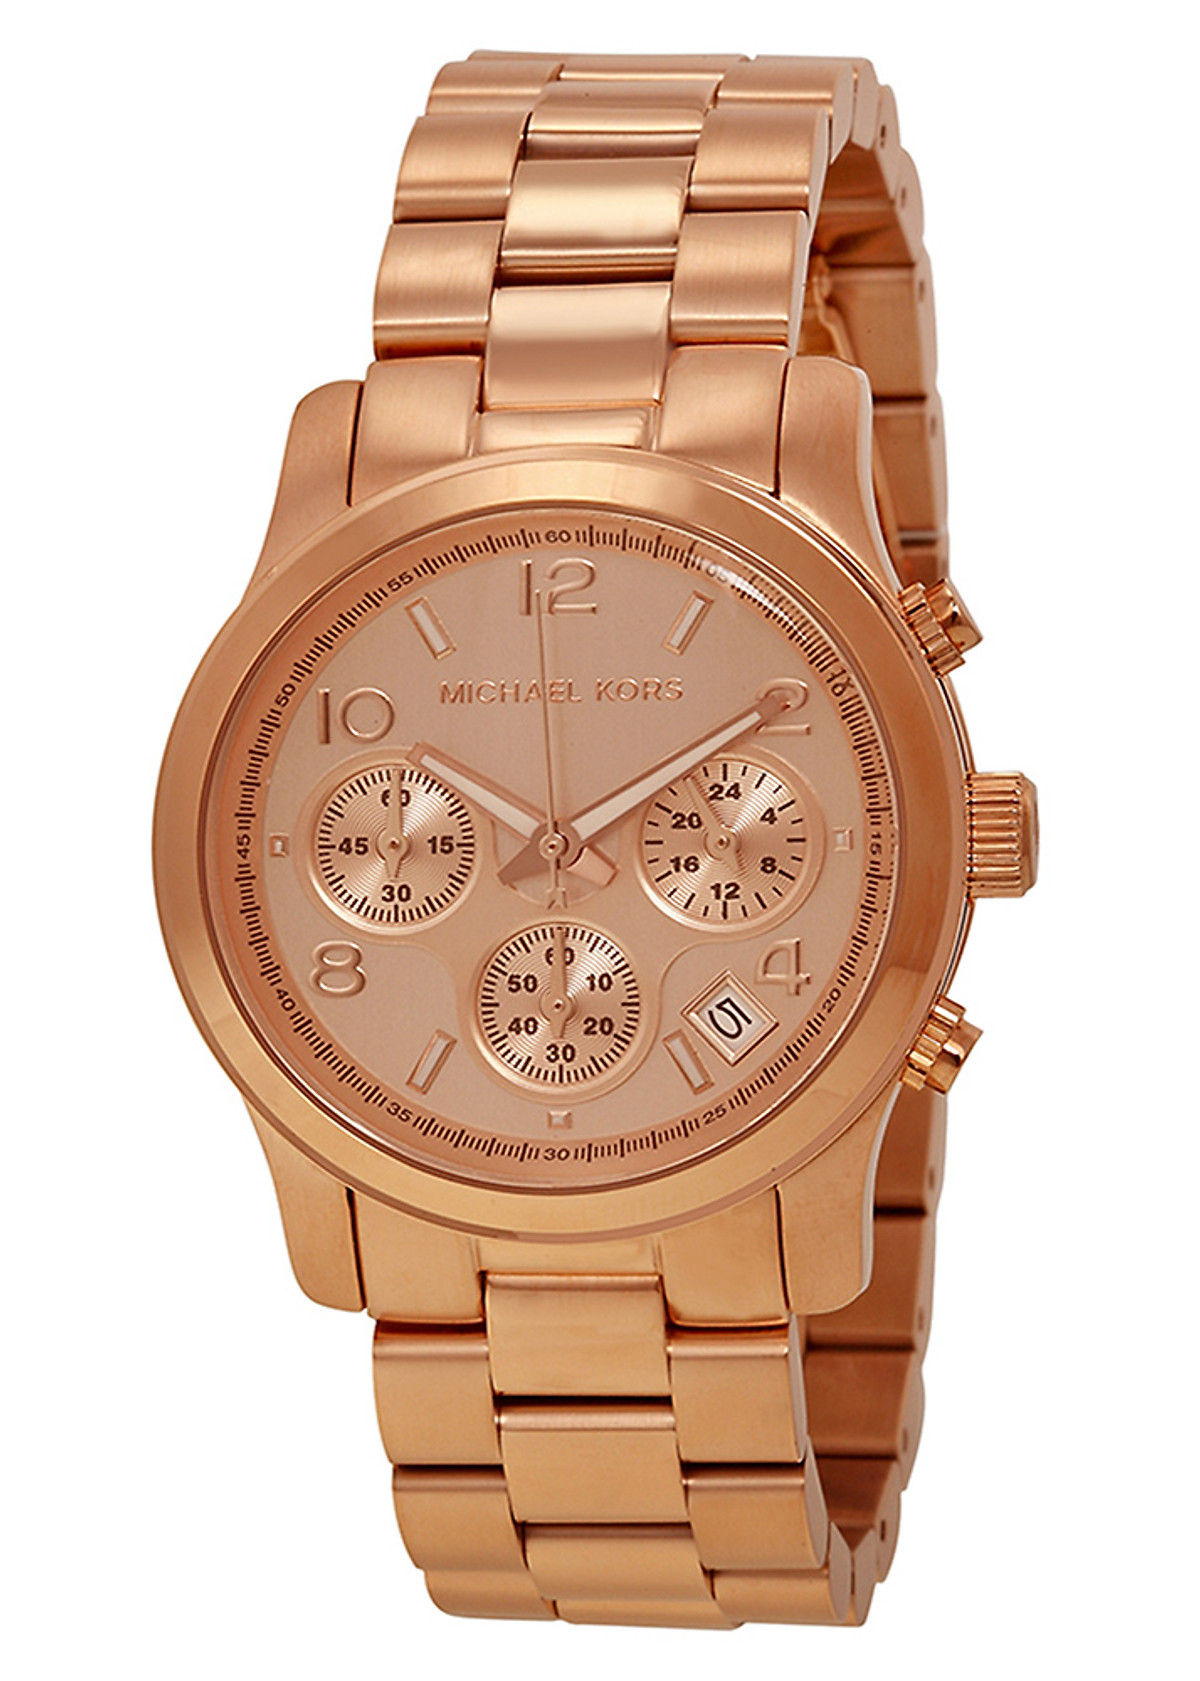 Amazoncom Michael Kors Watch Womens Rose Gold Plated Stainless Steel  Bracelet MK5128  Michael Kors Clothing Shoes  Jewelry